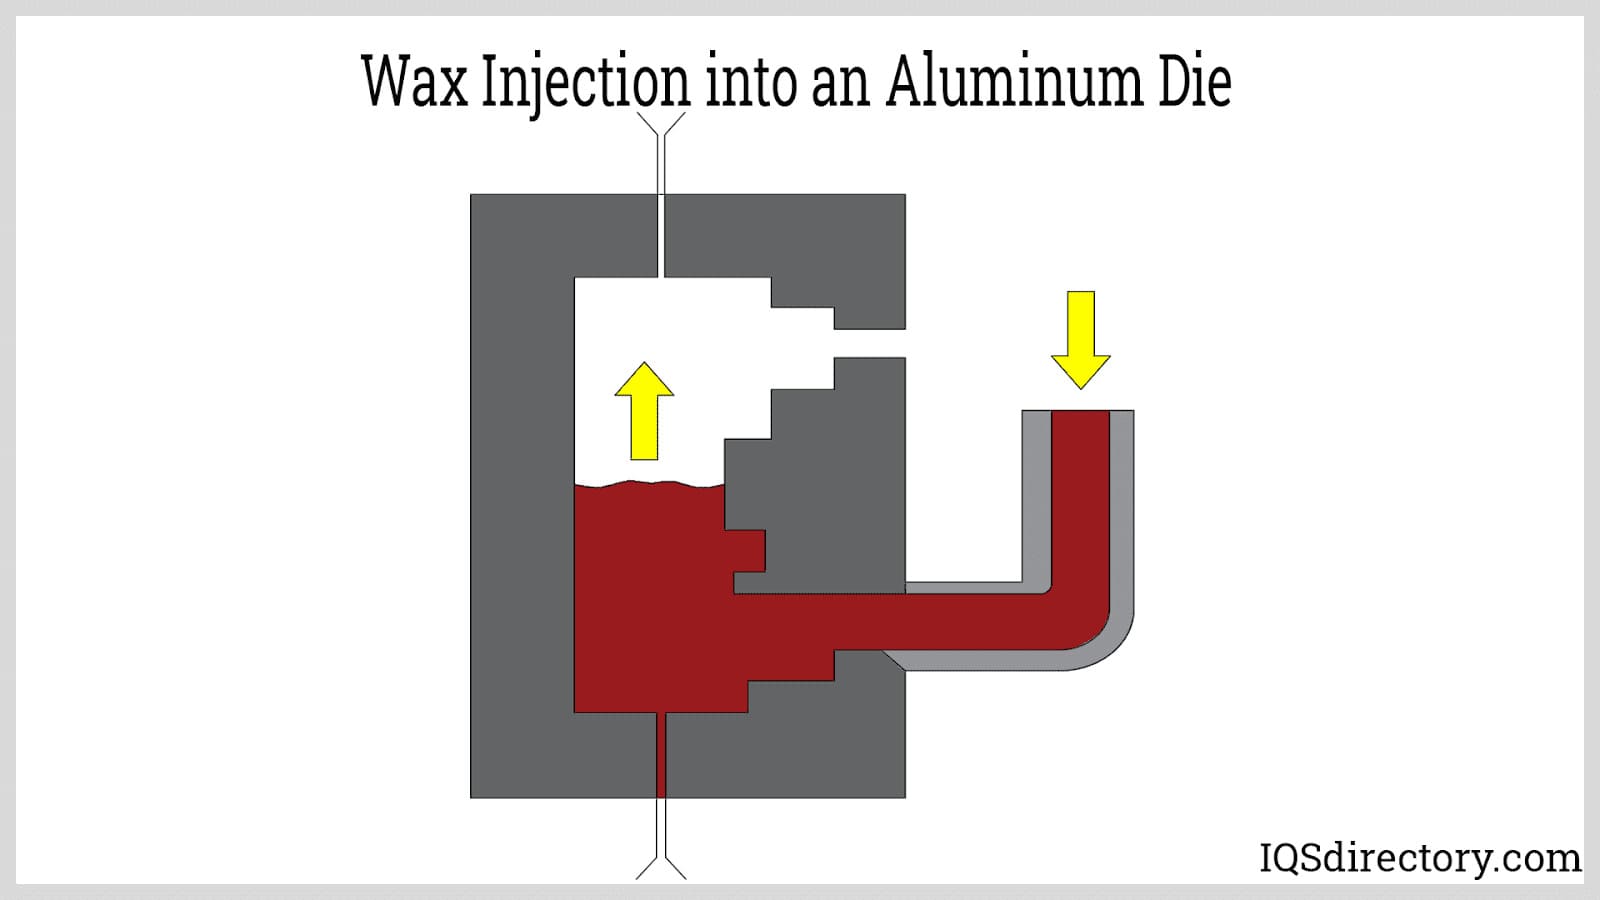 Wax Injection into an Aluminum Die